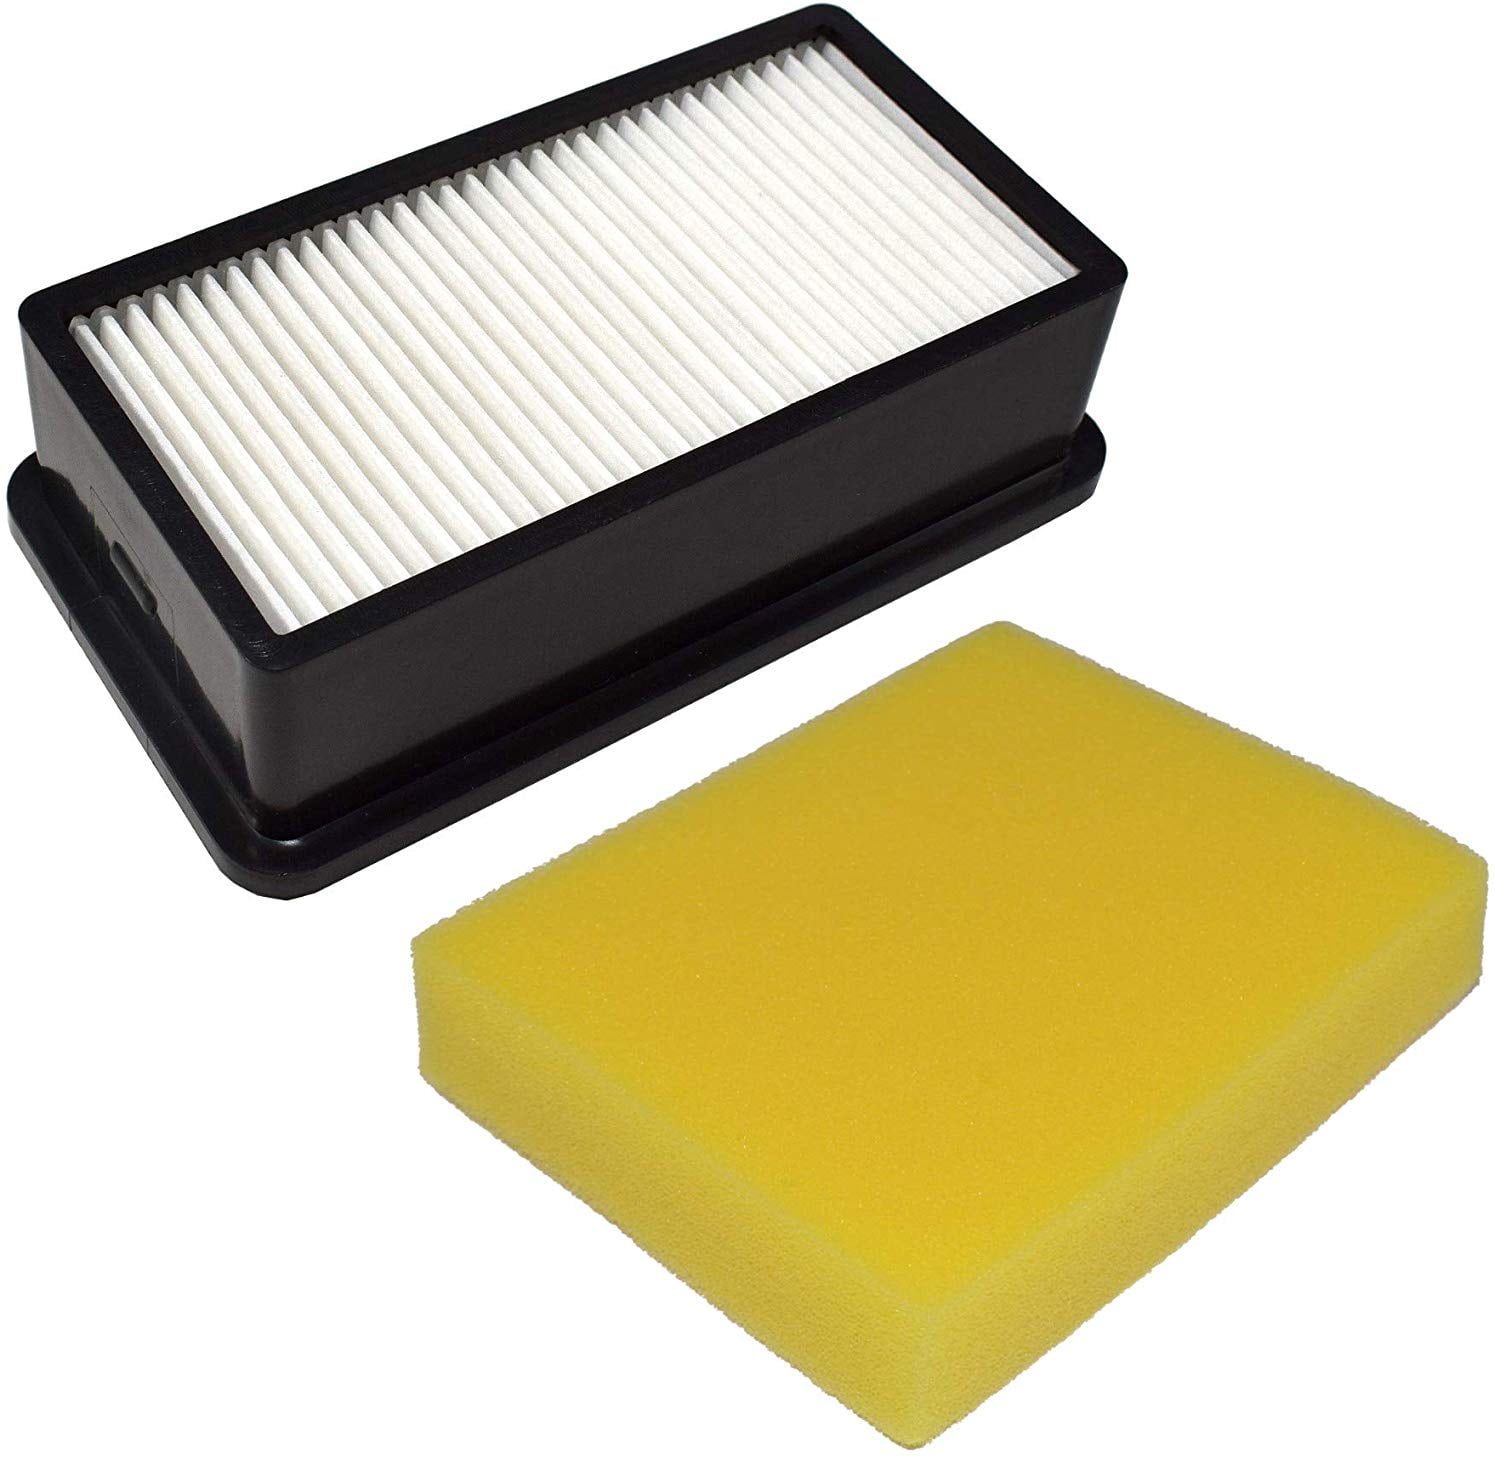 Lemige 2 2 Pack Filters for Bissell 1008 CleanView Vacuums Replacement Filters Kit,Compare to Part # 2032663 & 1601502